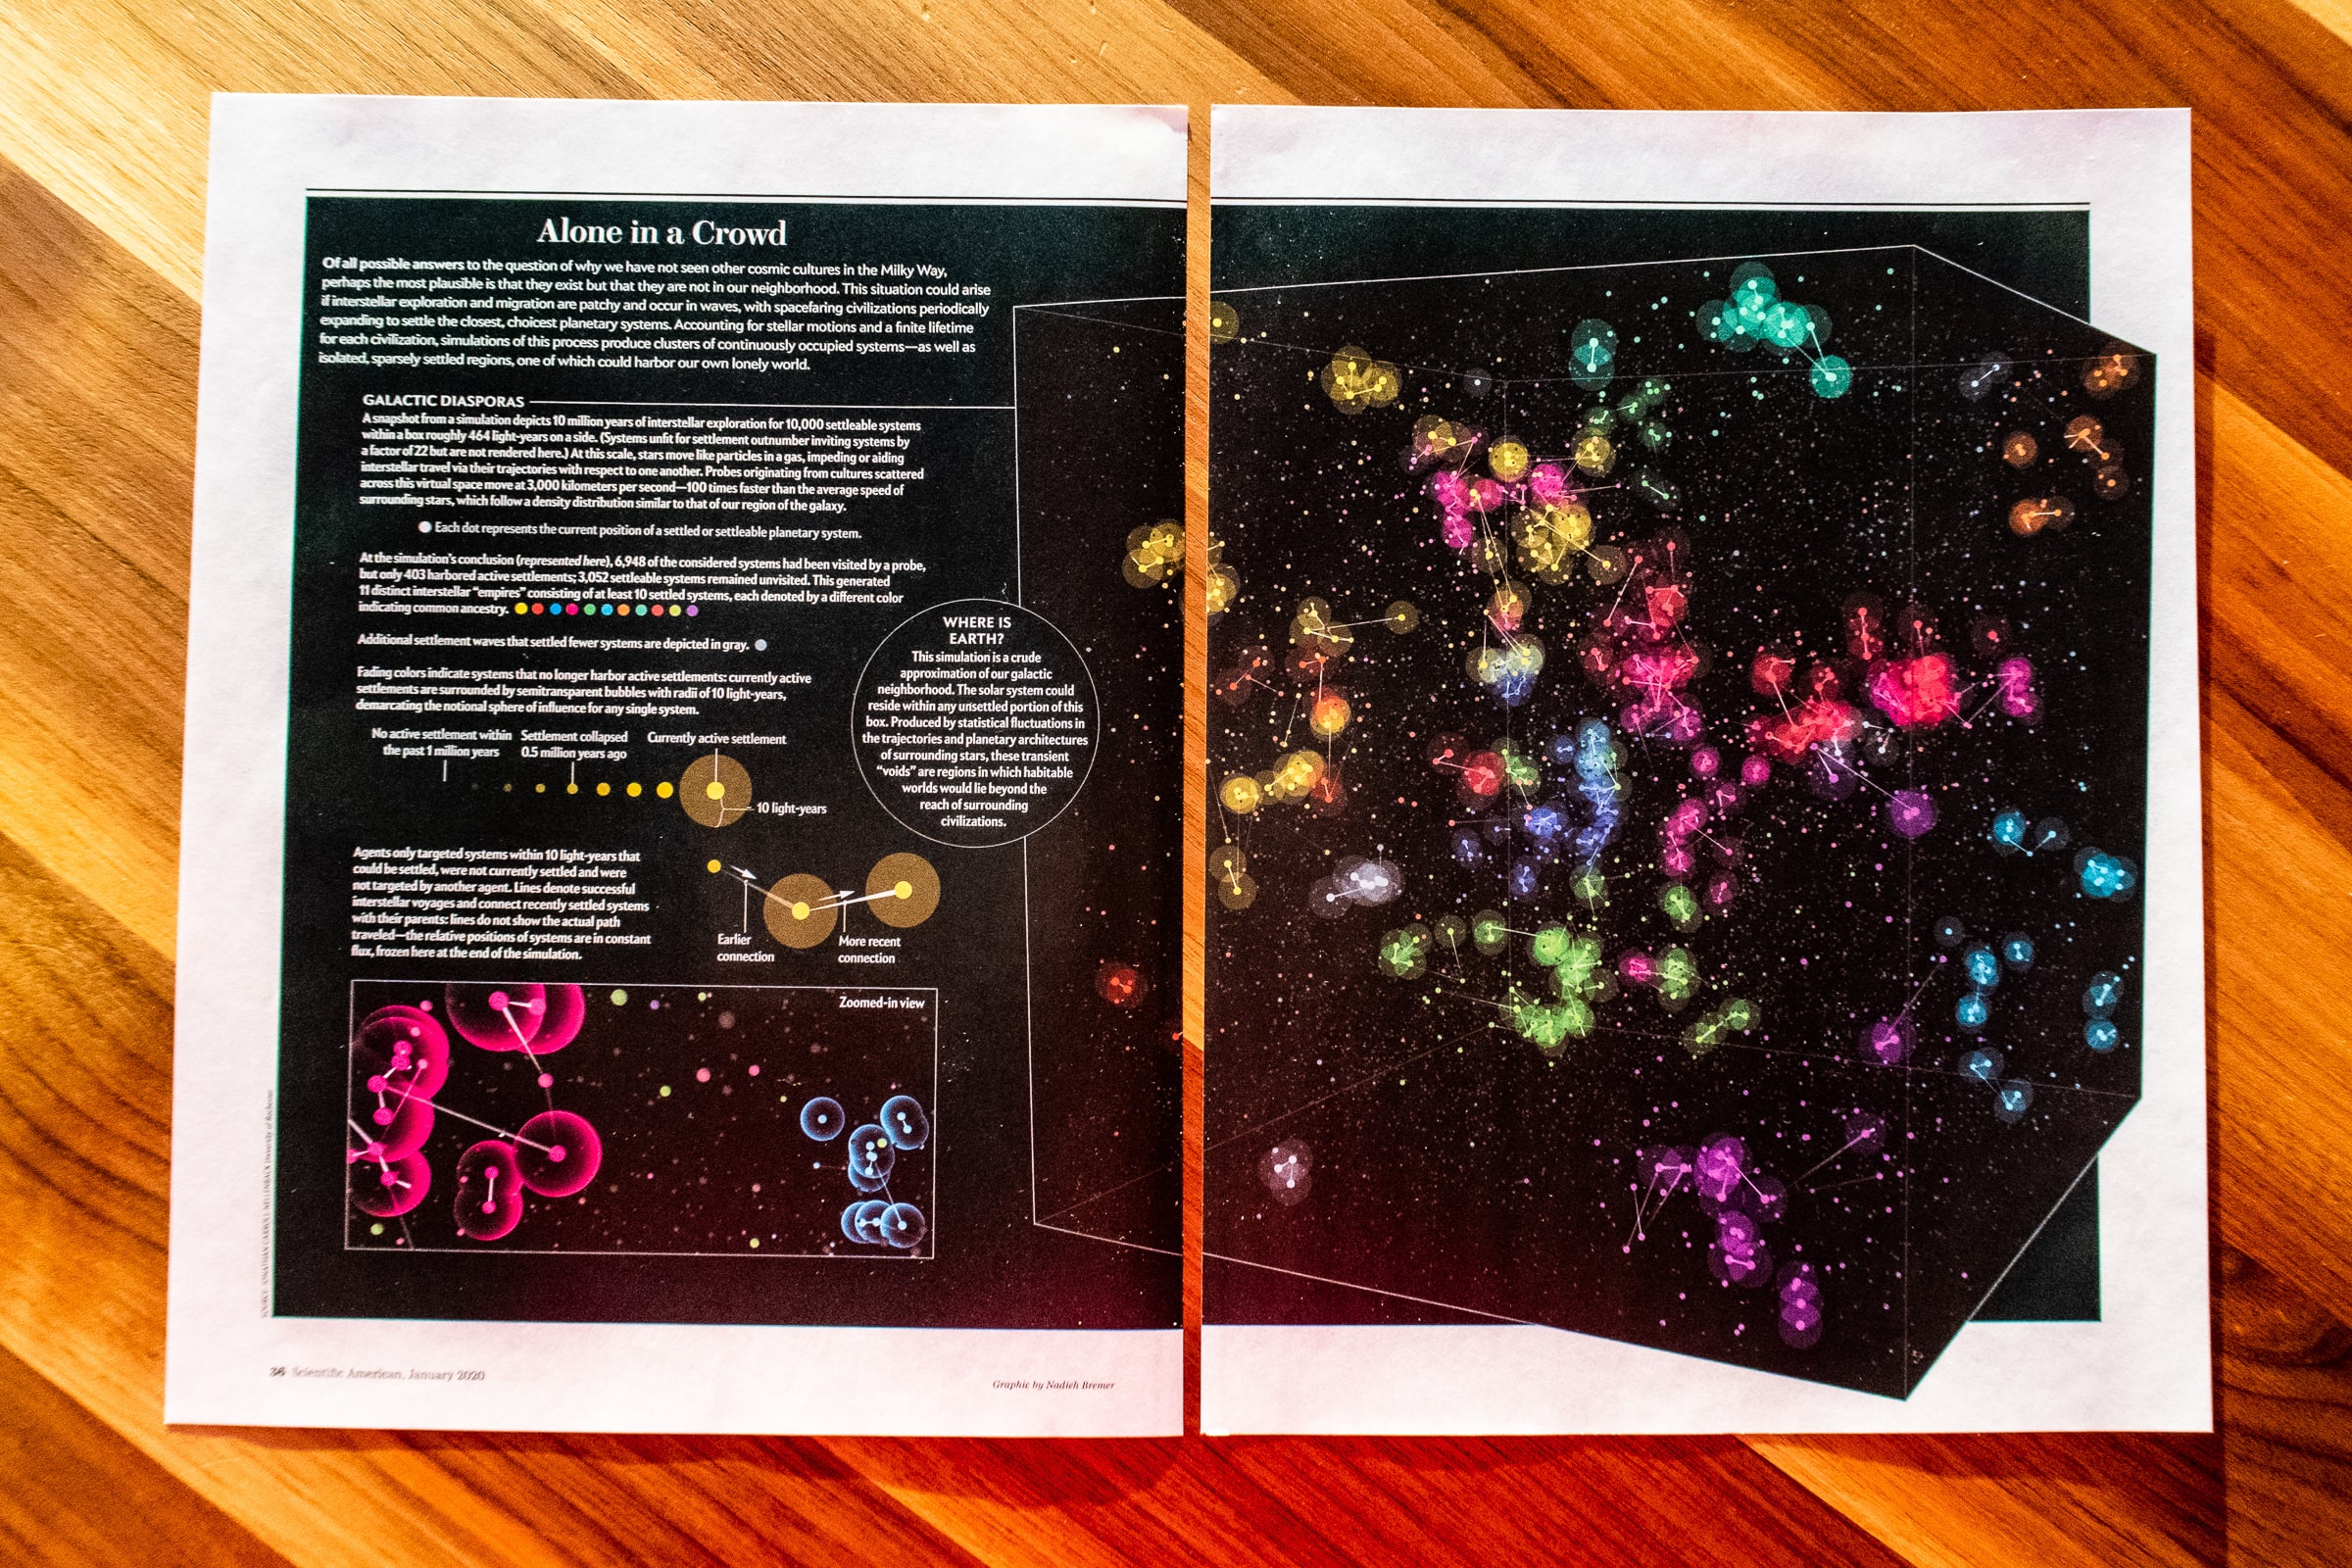 The full spread of the visualization of the Fermi Paradox simulation